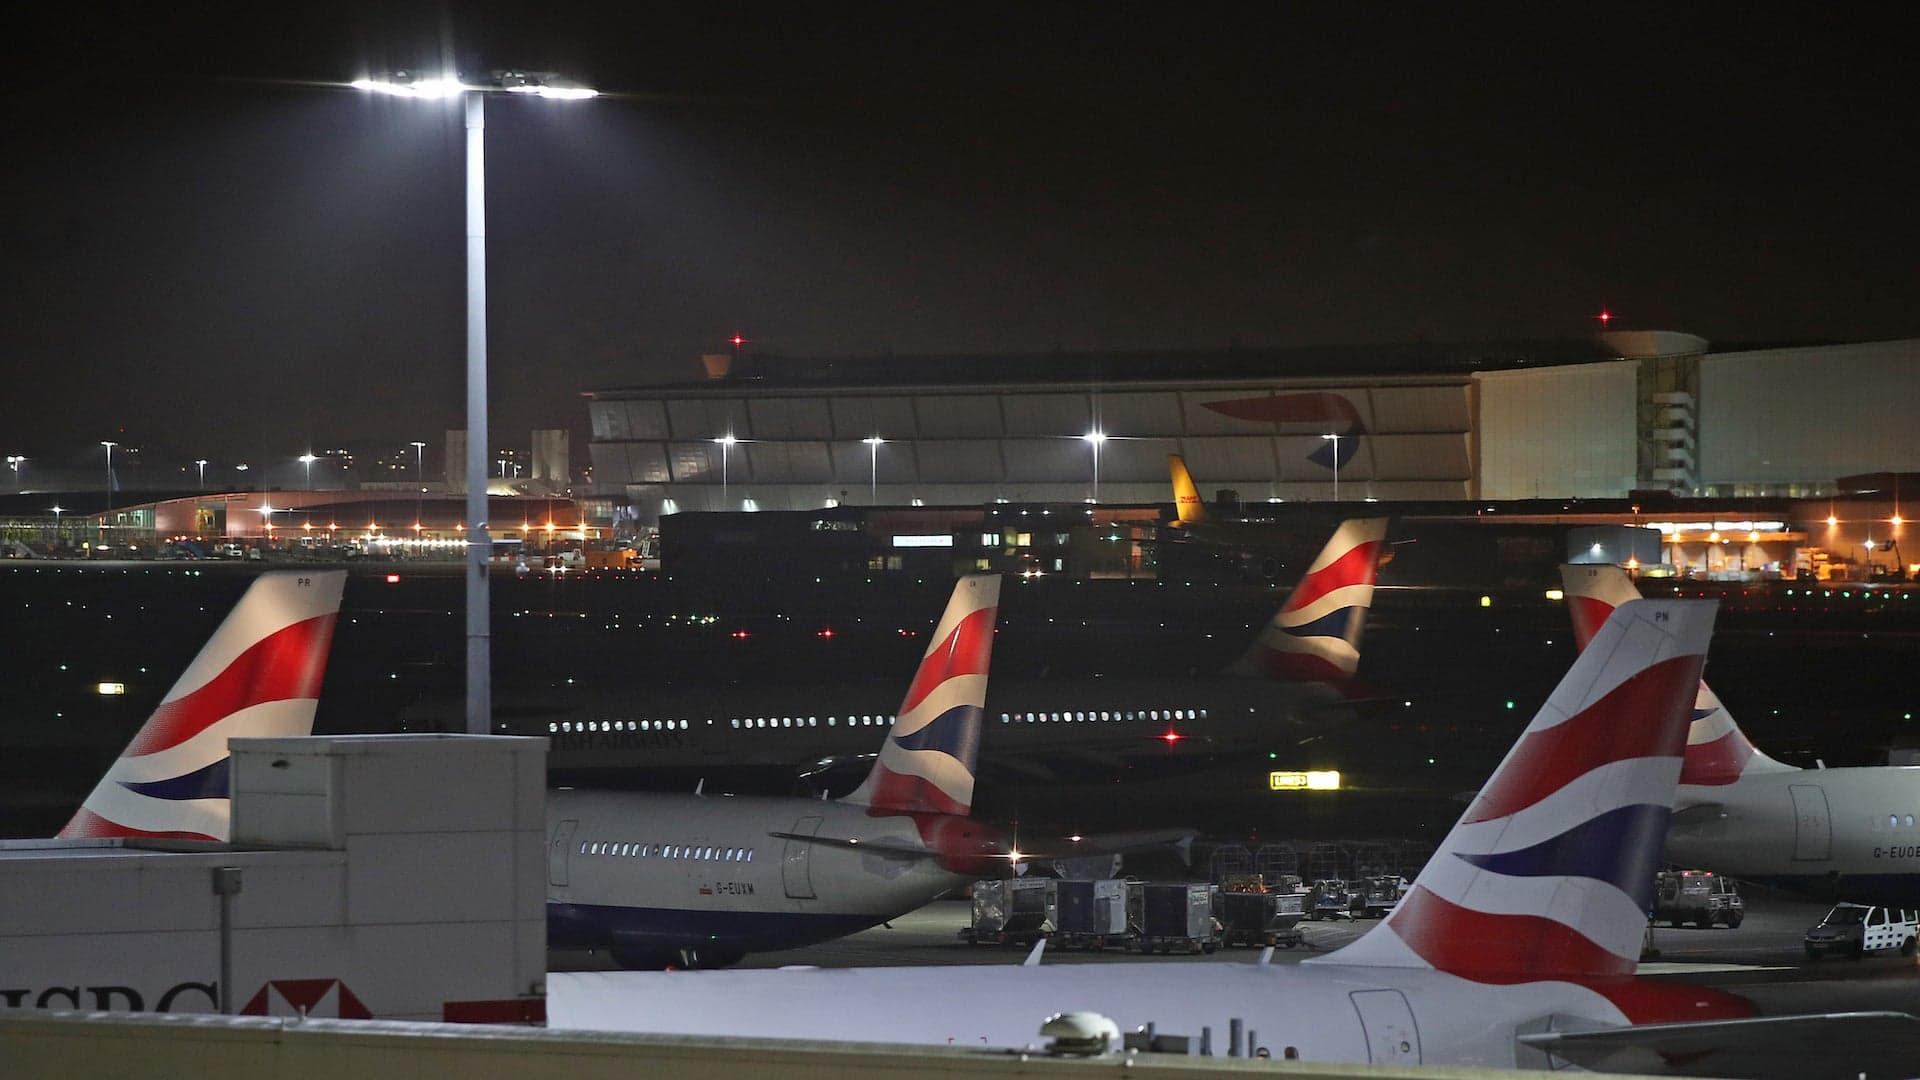 Heathrow Airport Drone Sighting Being Investigated by British Police and Military